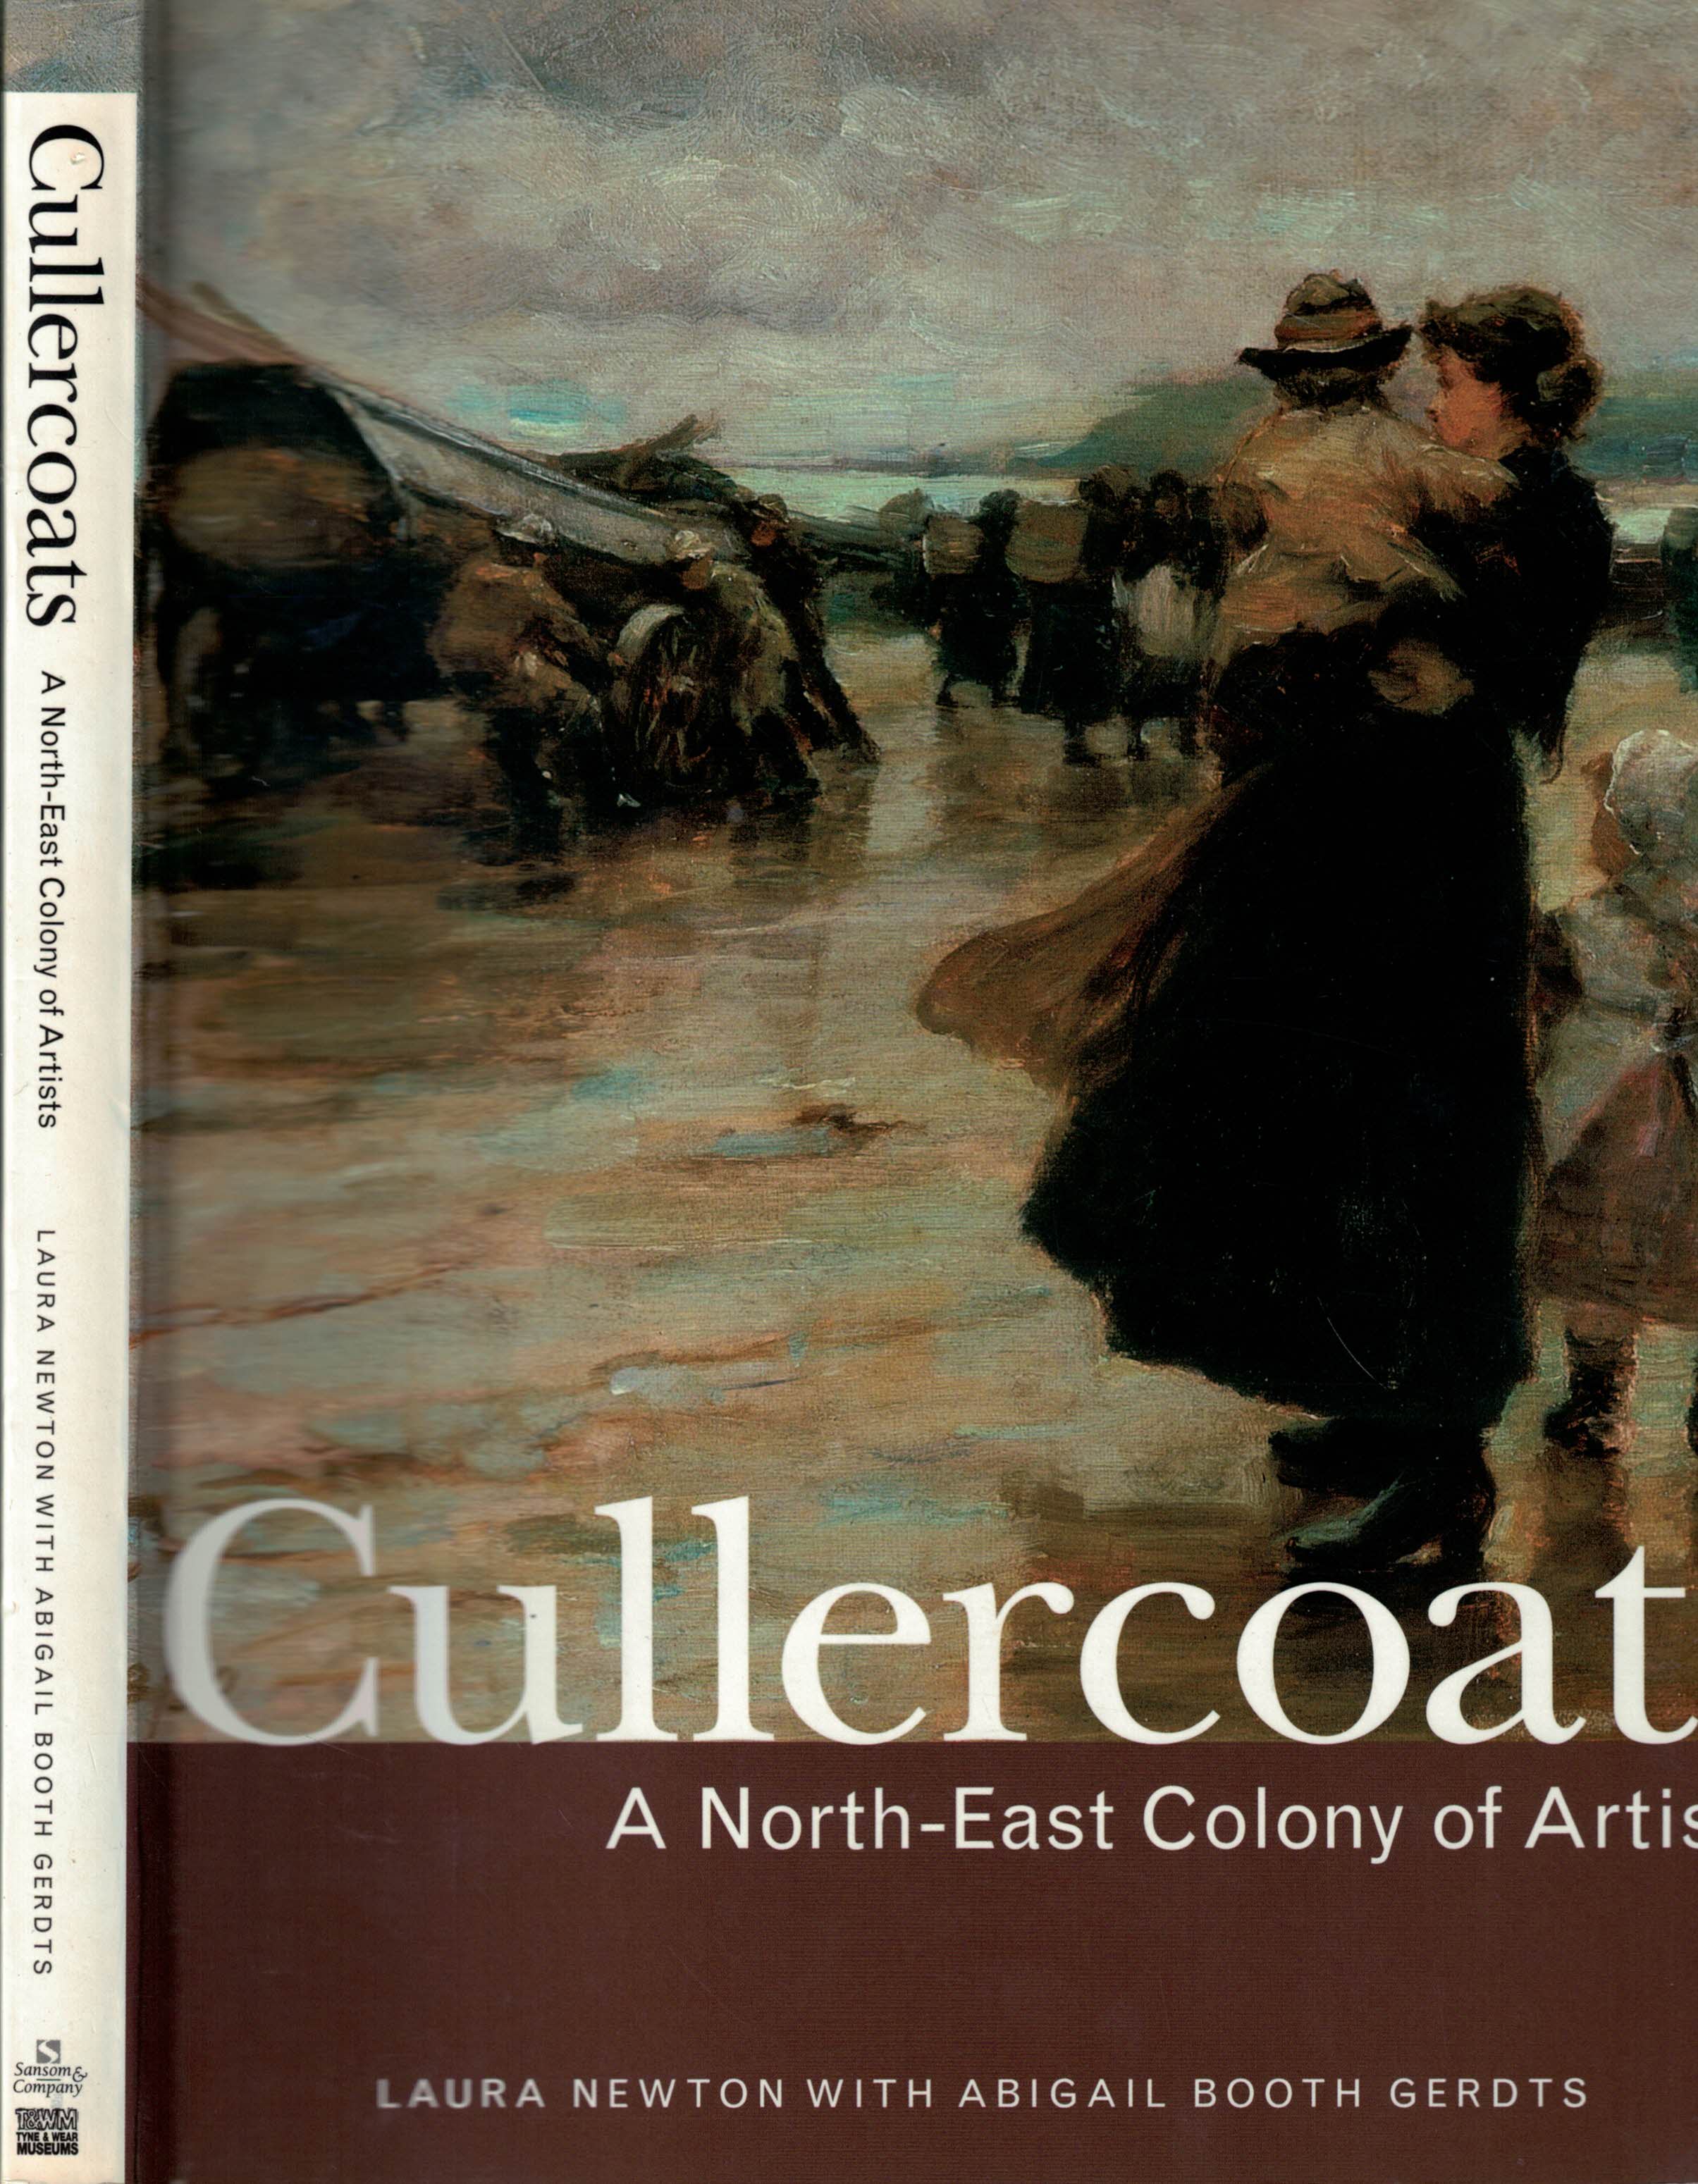 Cullercoats. A North-East Colony of Artists.